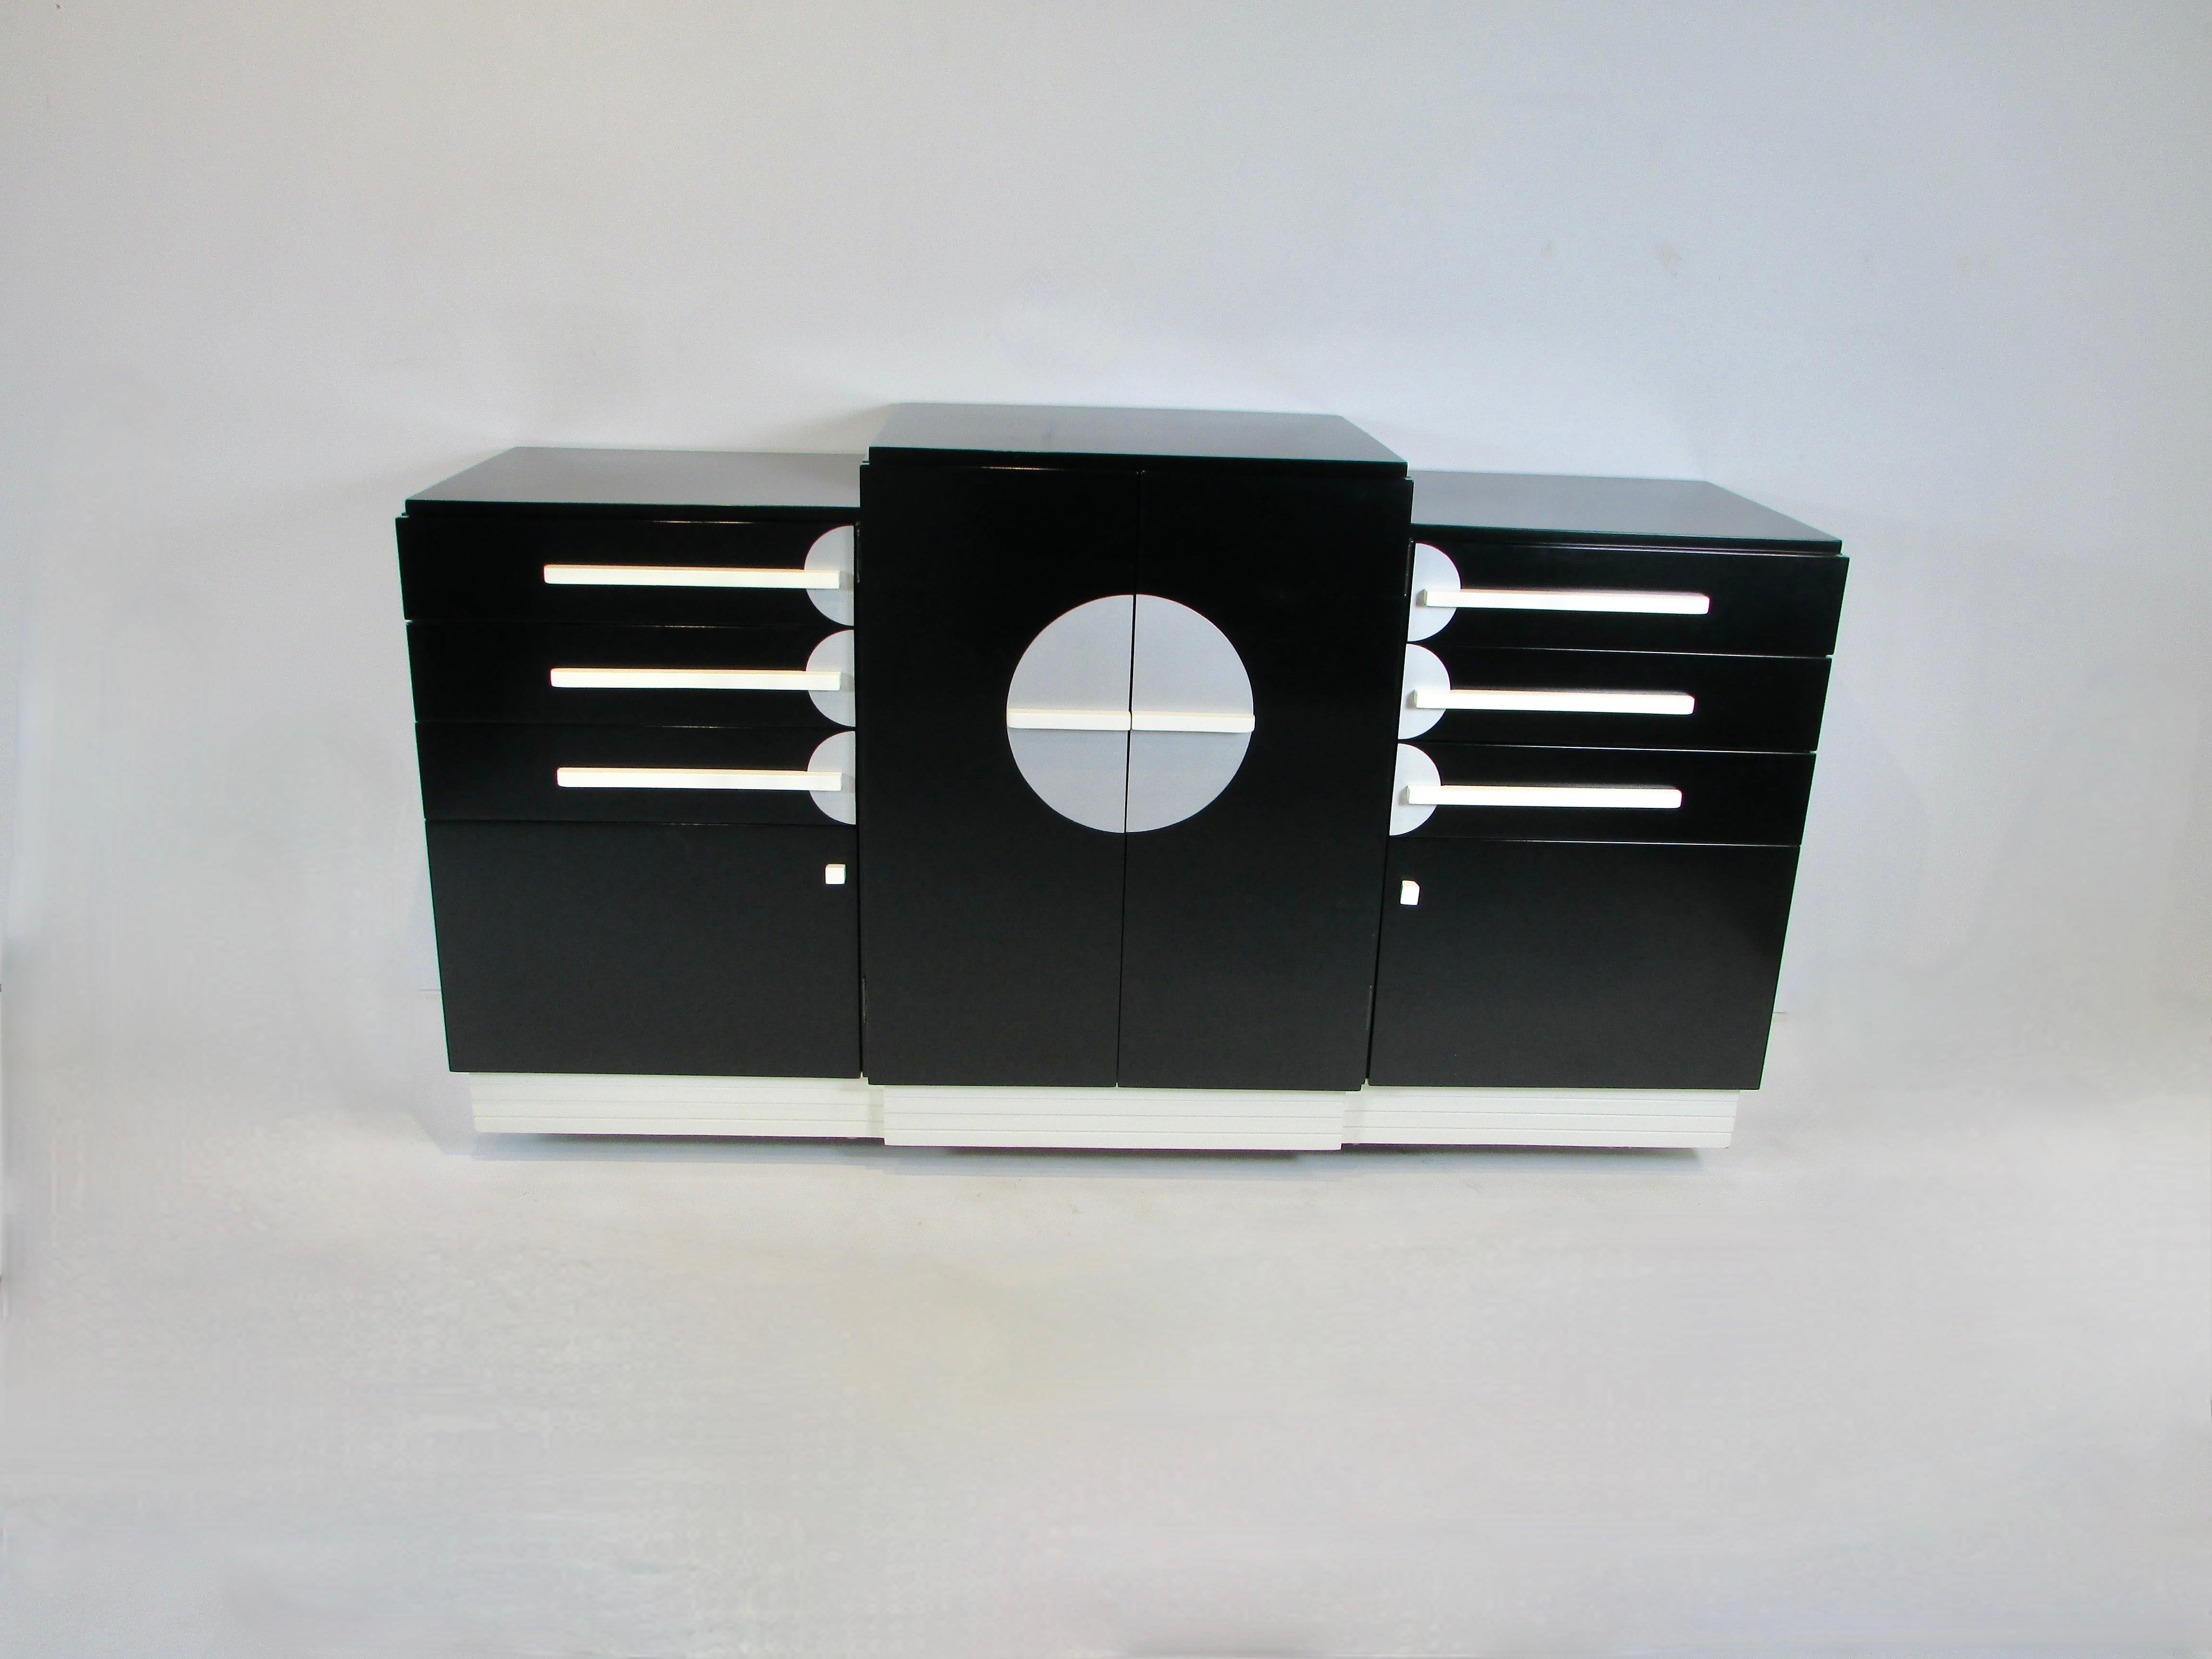 Period Art Deco credenza stepped form skyscraper style  in cream and matte black lacquer finish . Center section holds three shelves behind lacquered doors with white pulls mounted on round aluminum motifs . Either side cabinets have  three drawers